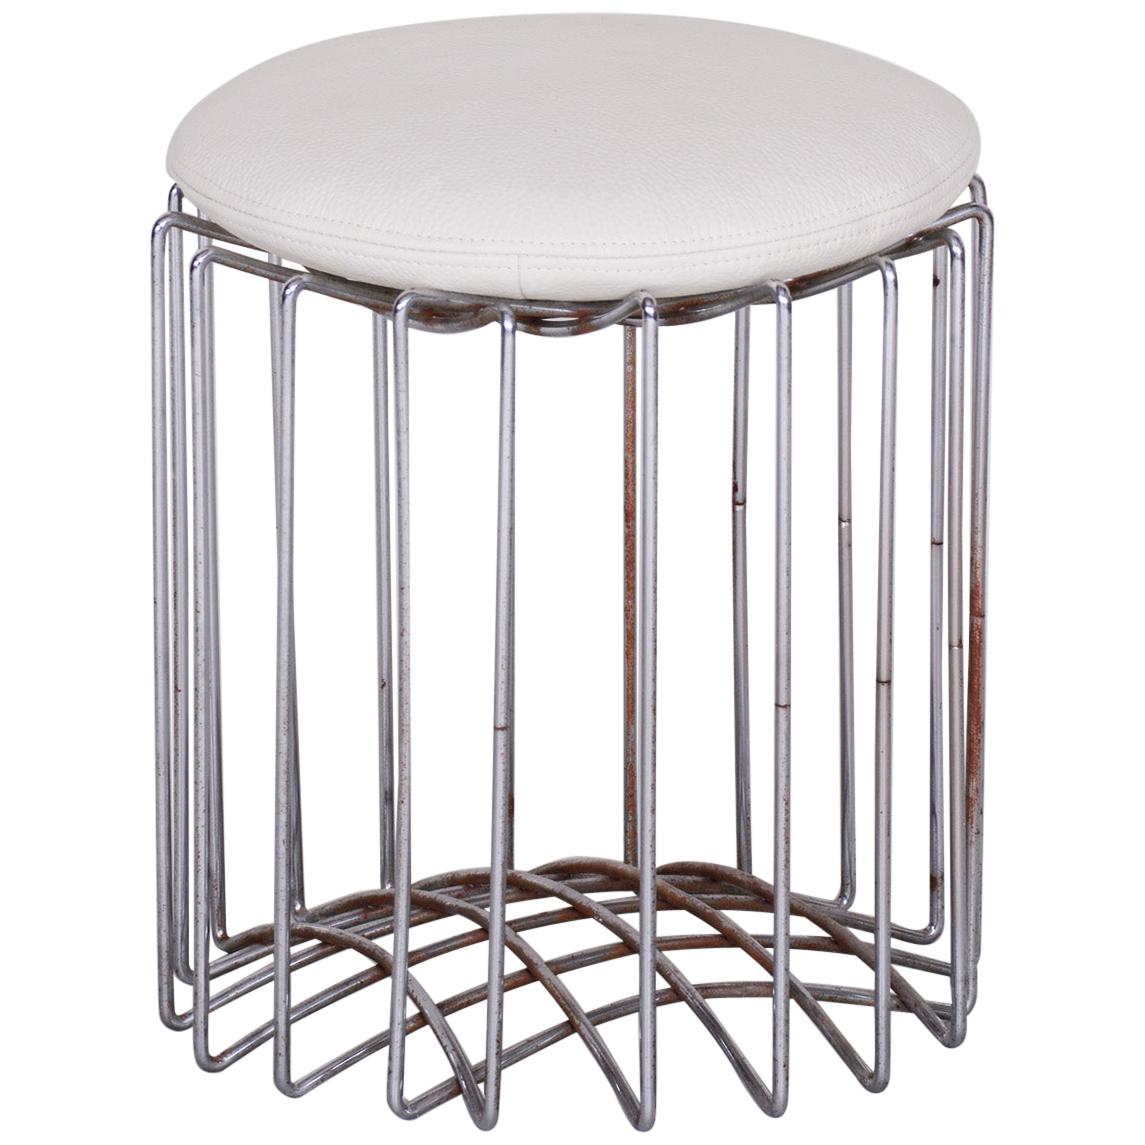 Unique White Round Bauhaus Chrome Stool, New High Quality Leather, 1930s For Sale